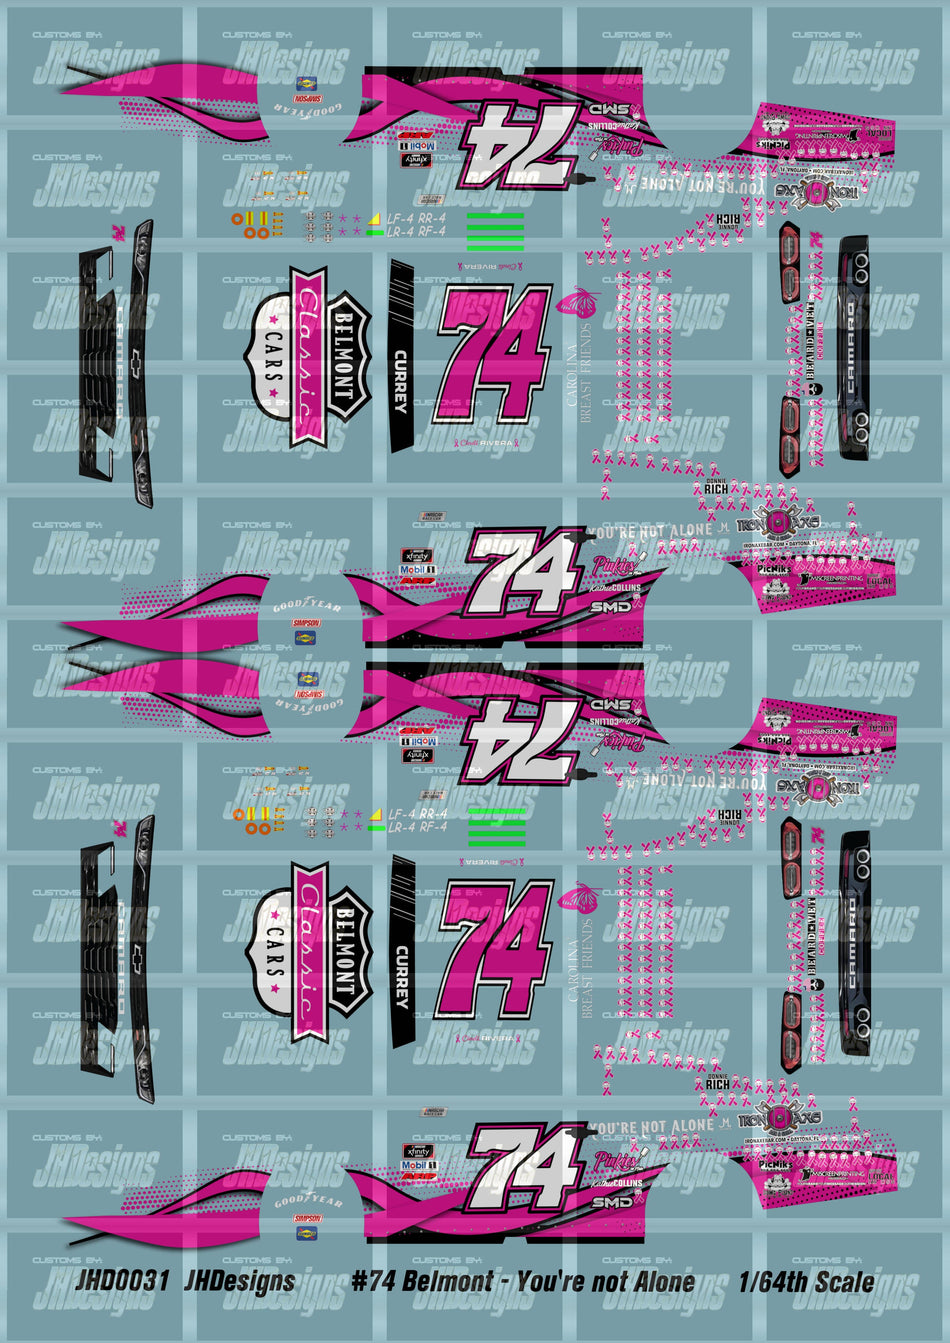 JH Designs Bailey Currey 2020 NXS #74 Belmont Classic Cars - You're Not Alone 1:64 Racecar Decal Set